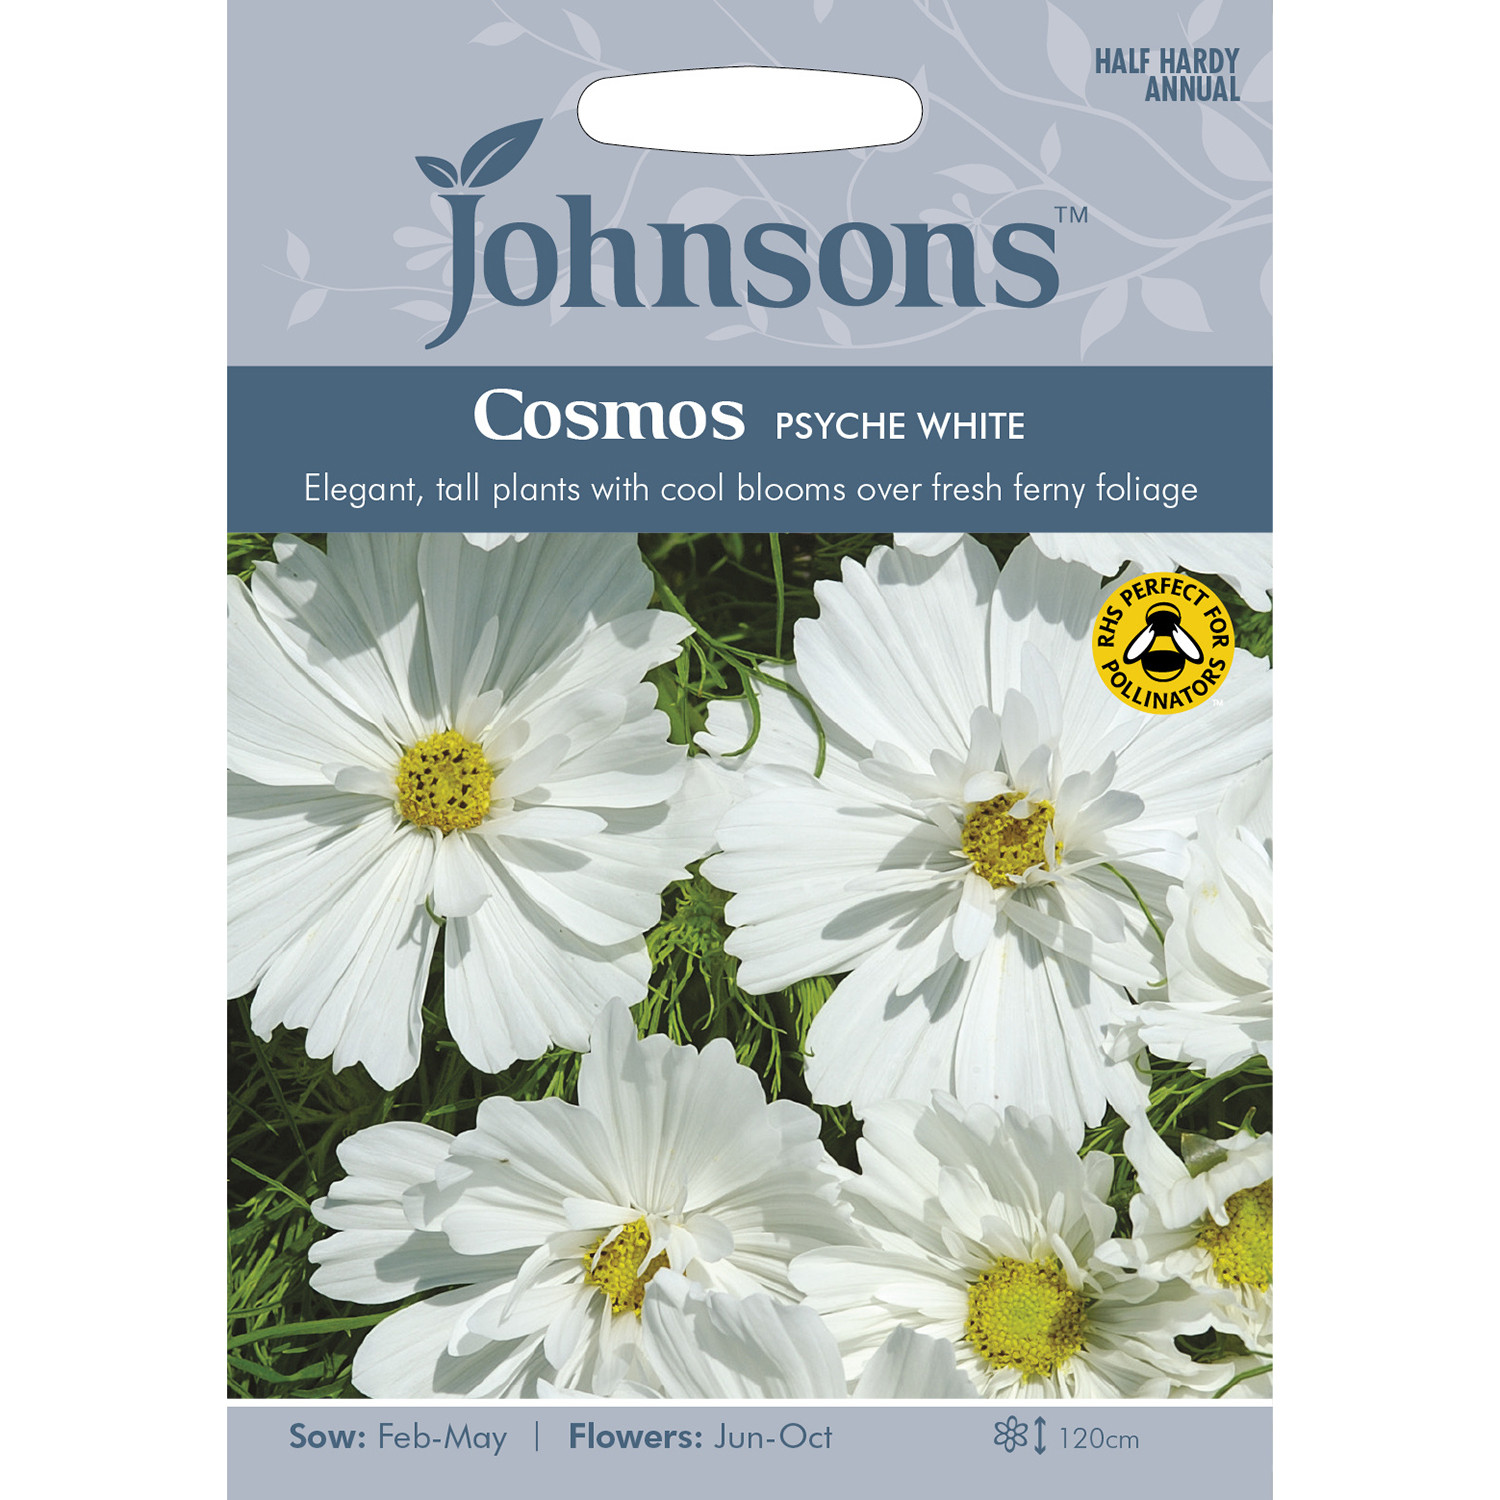 Johnsons Cosmos Psyche White Flower Seeds Image 2